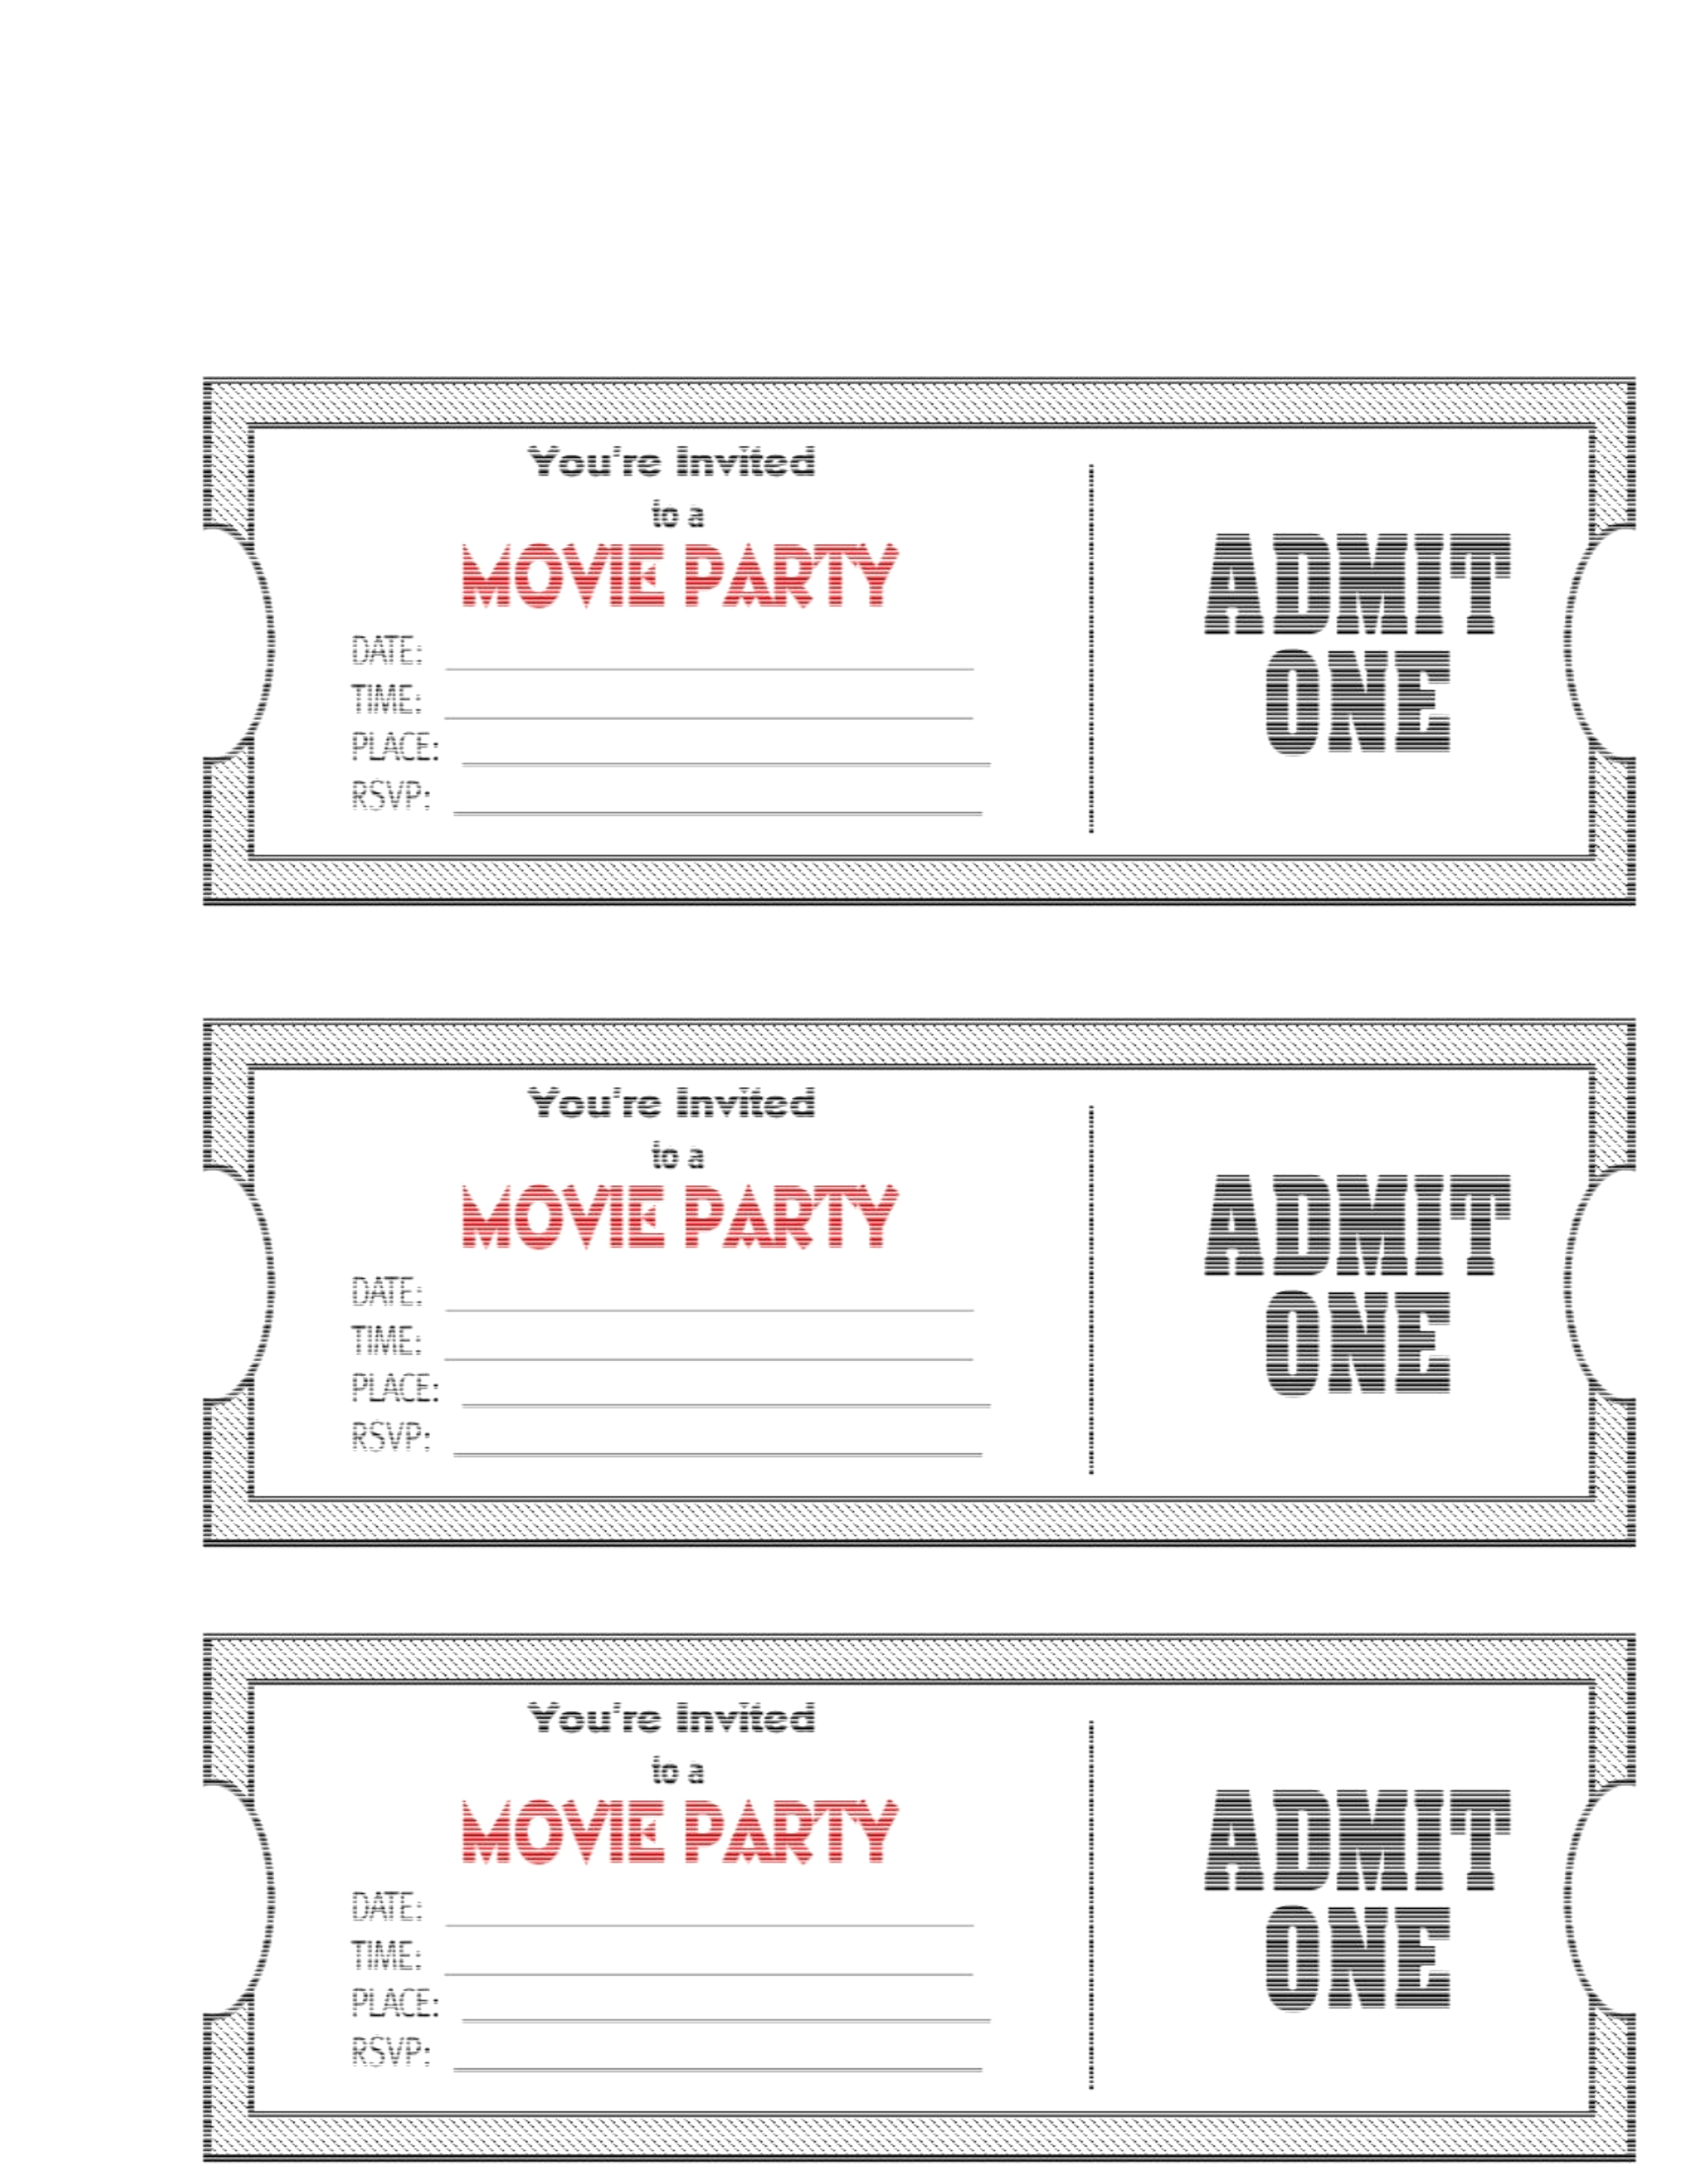 Admit One Invitation Template • Business Template Ideas